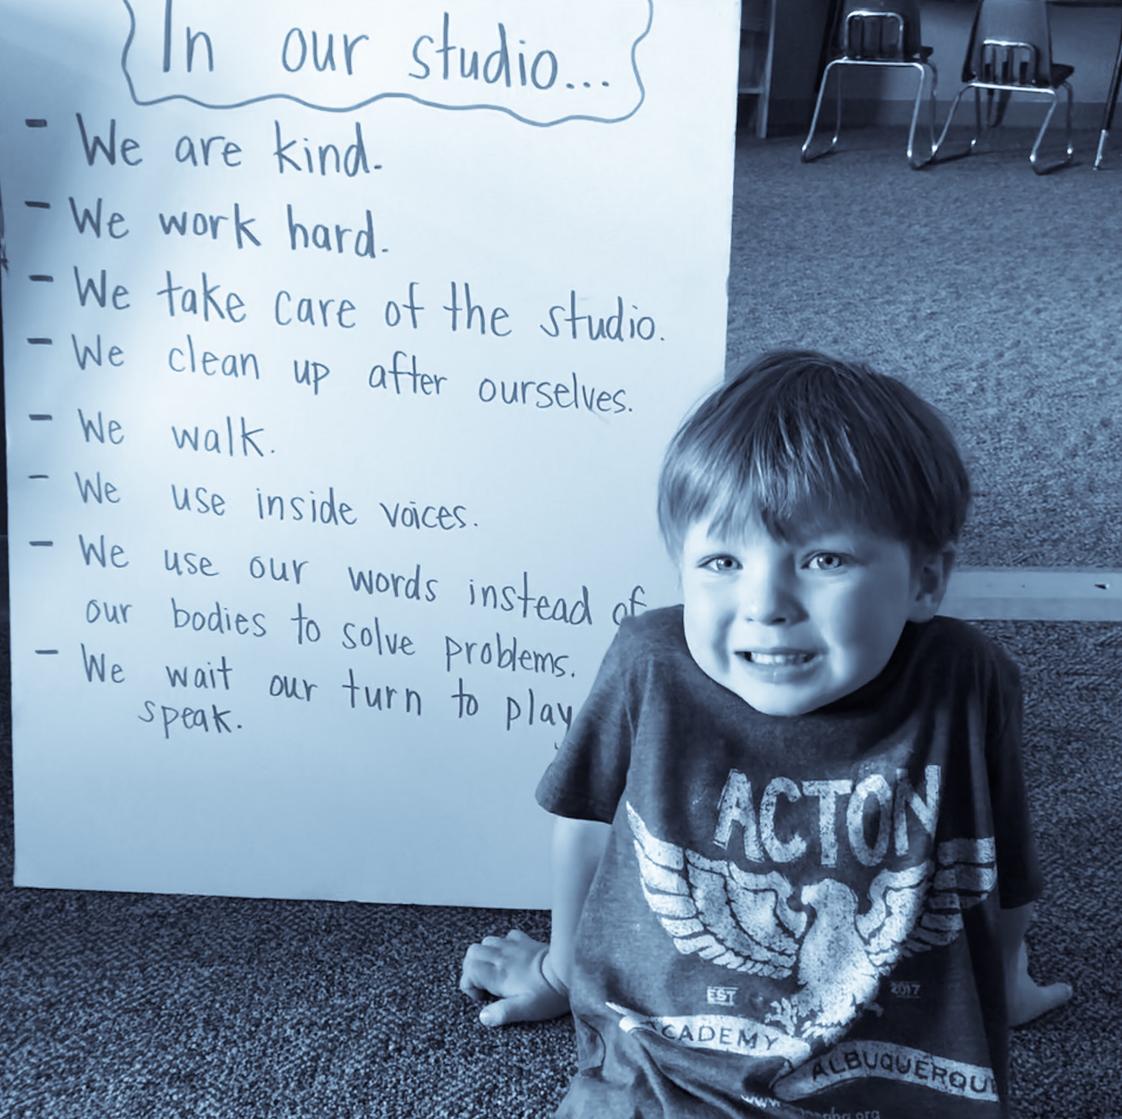 Acton Academy Albuquerque Photo #1 - Even the K-1 Studio has their own student contract designed by the kids!